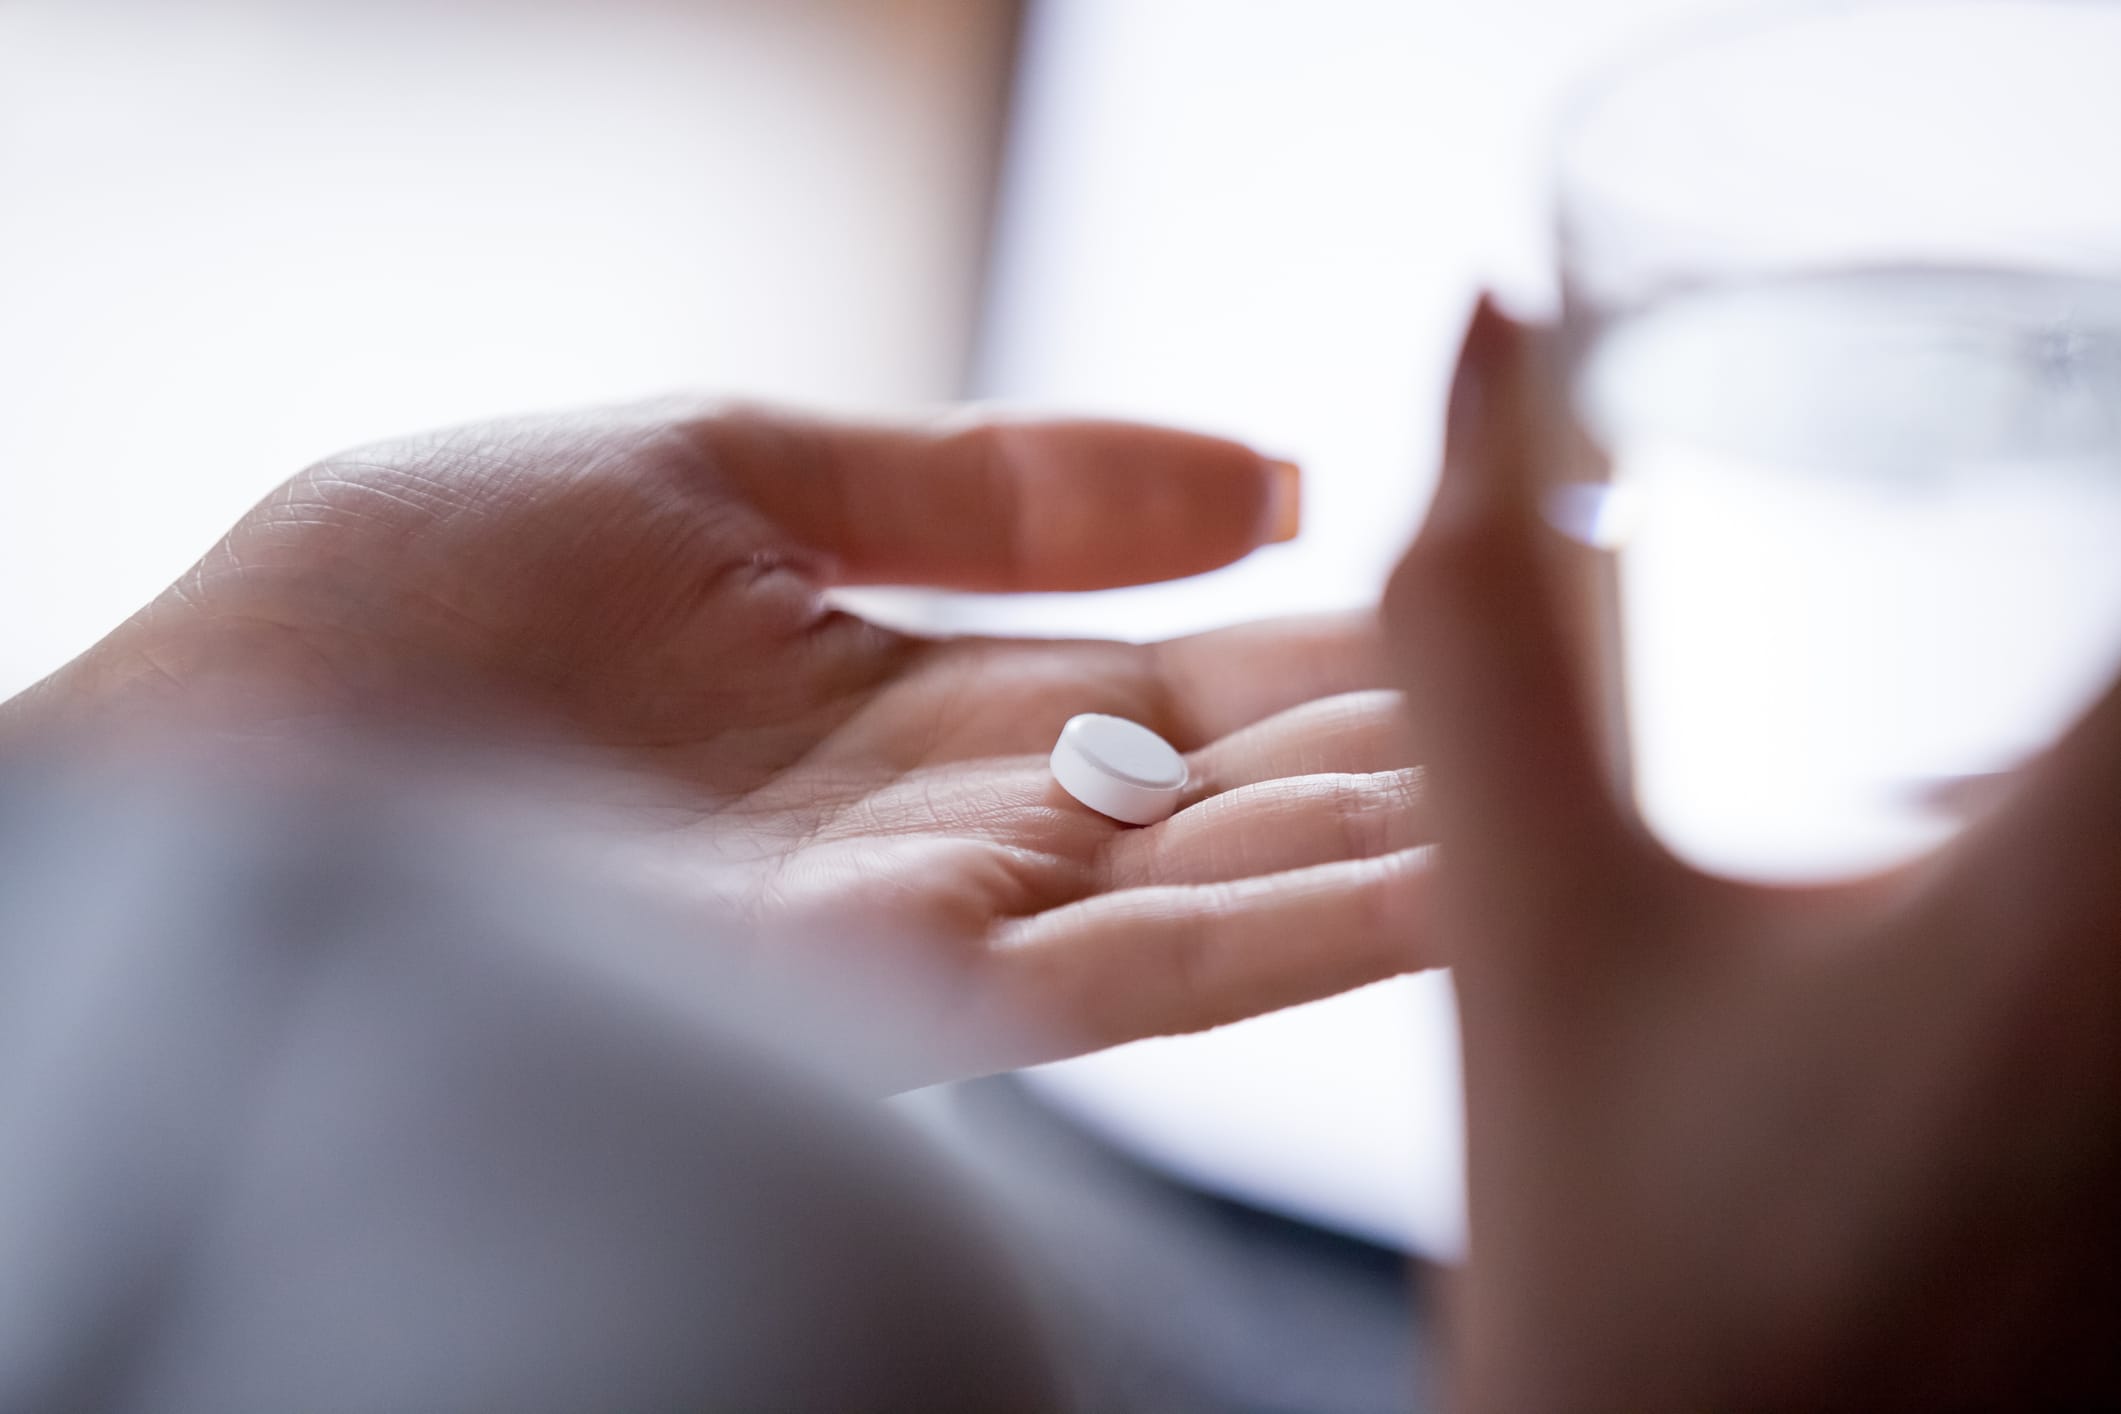 Walk-in Clinic Offering Abortion Pills – We Respect Your Choice